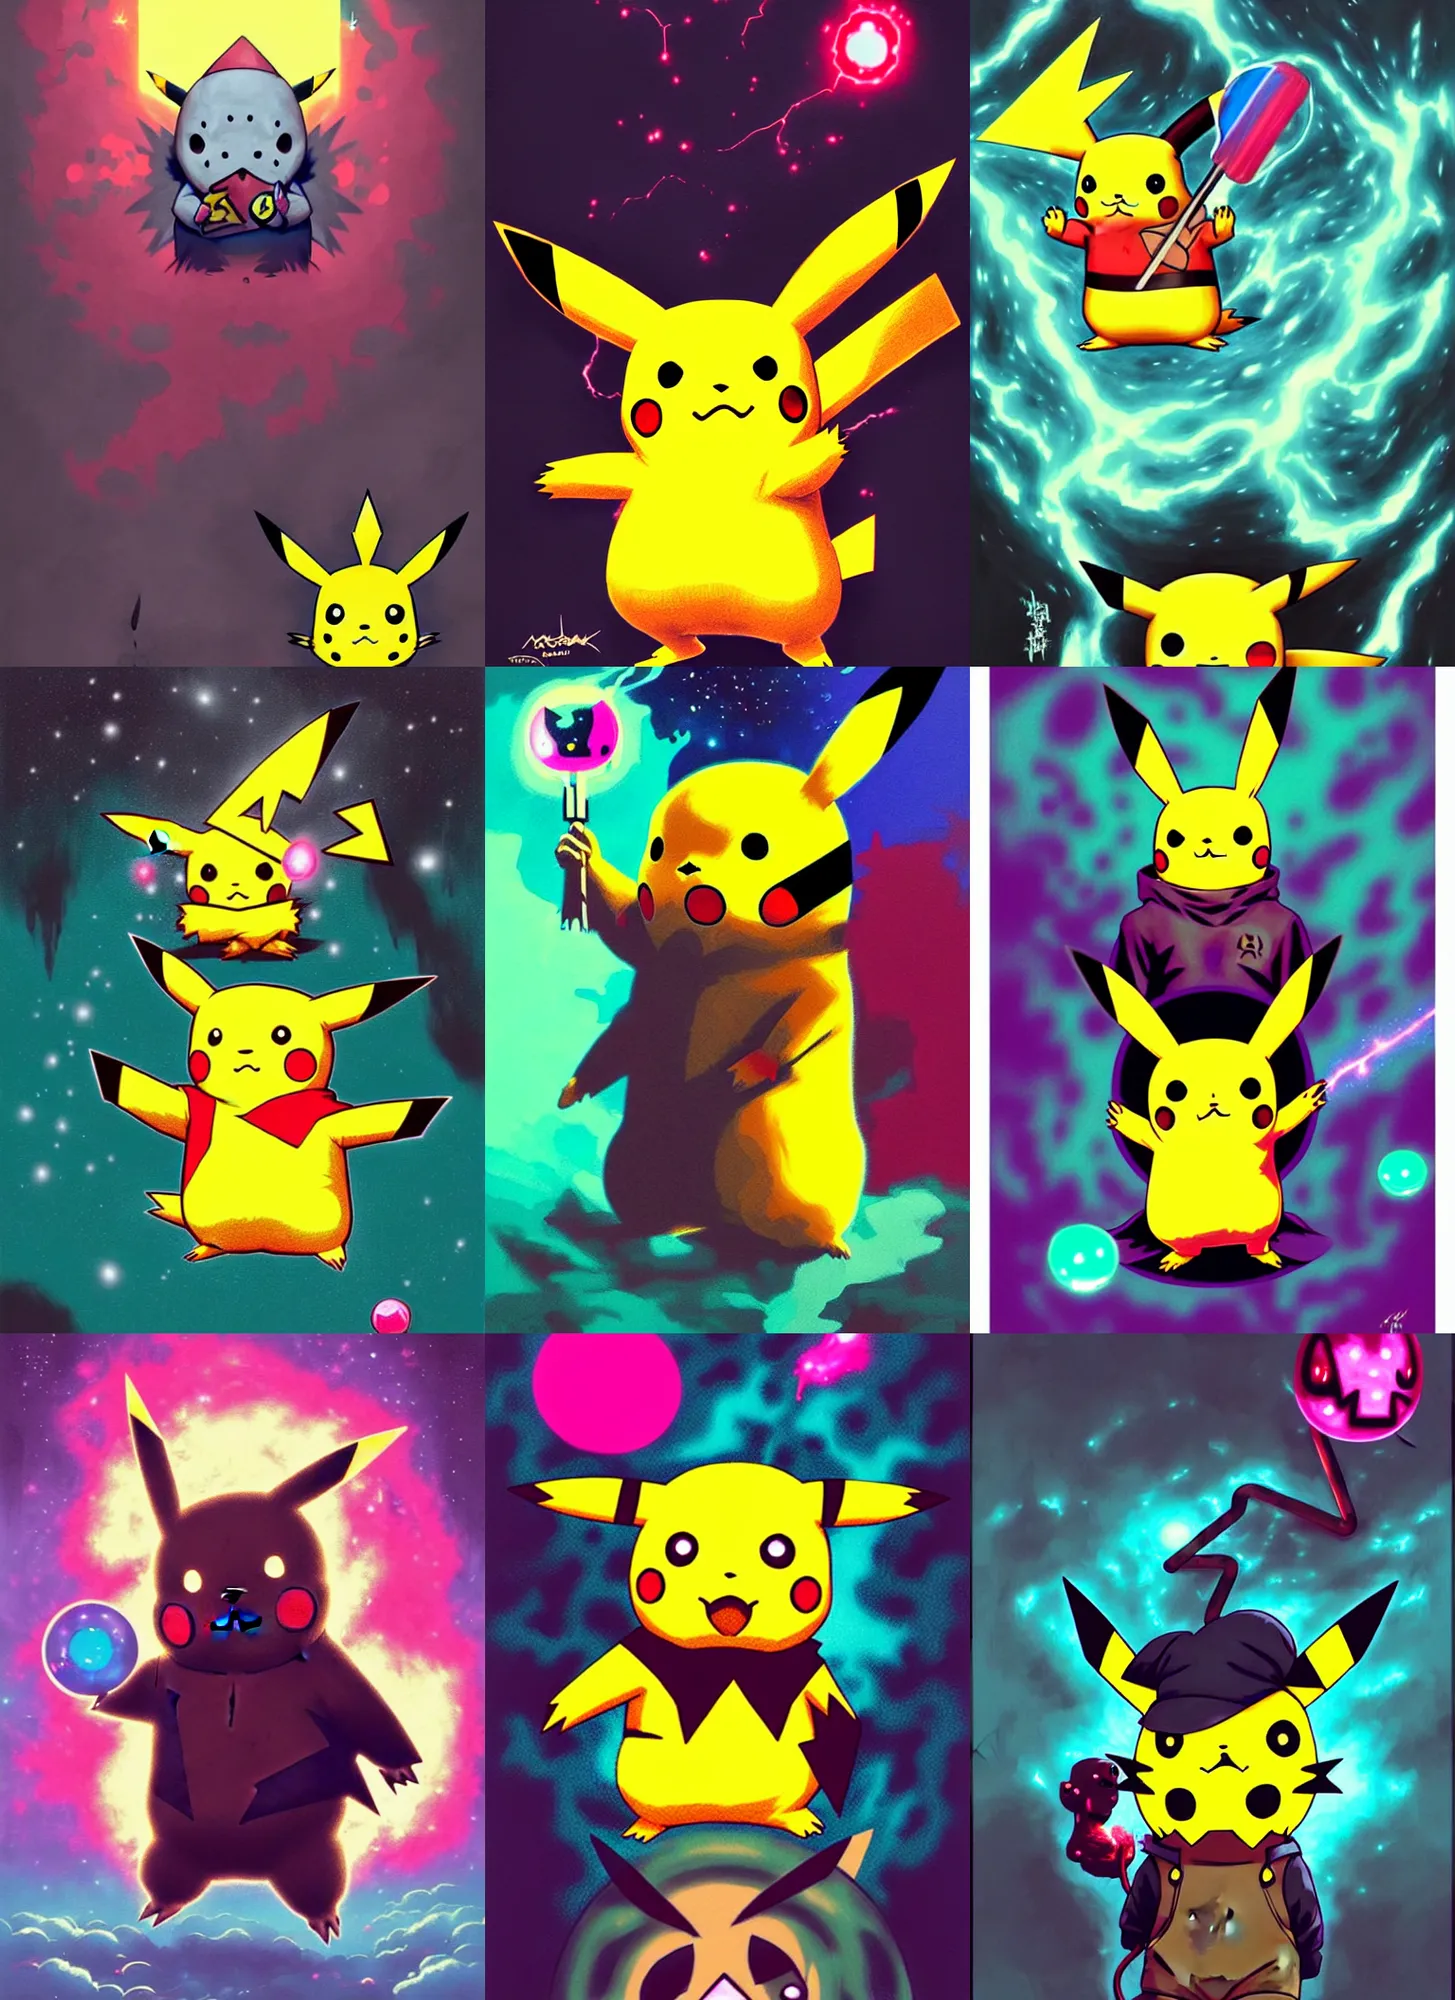 BeezGotBuzz on X: FREE! This Rick and Morty Pikachu Experiment WALLPAPER  is so EXCLUSIVE that if you aren't one of the first 300 people.. it's gone  and you MISS OUT! FREE FOR